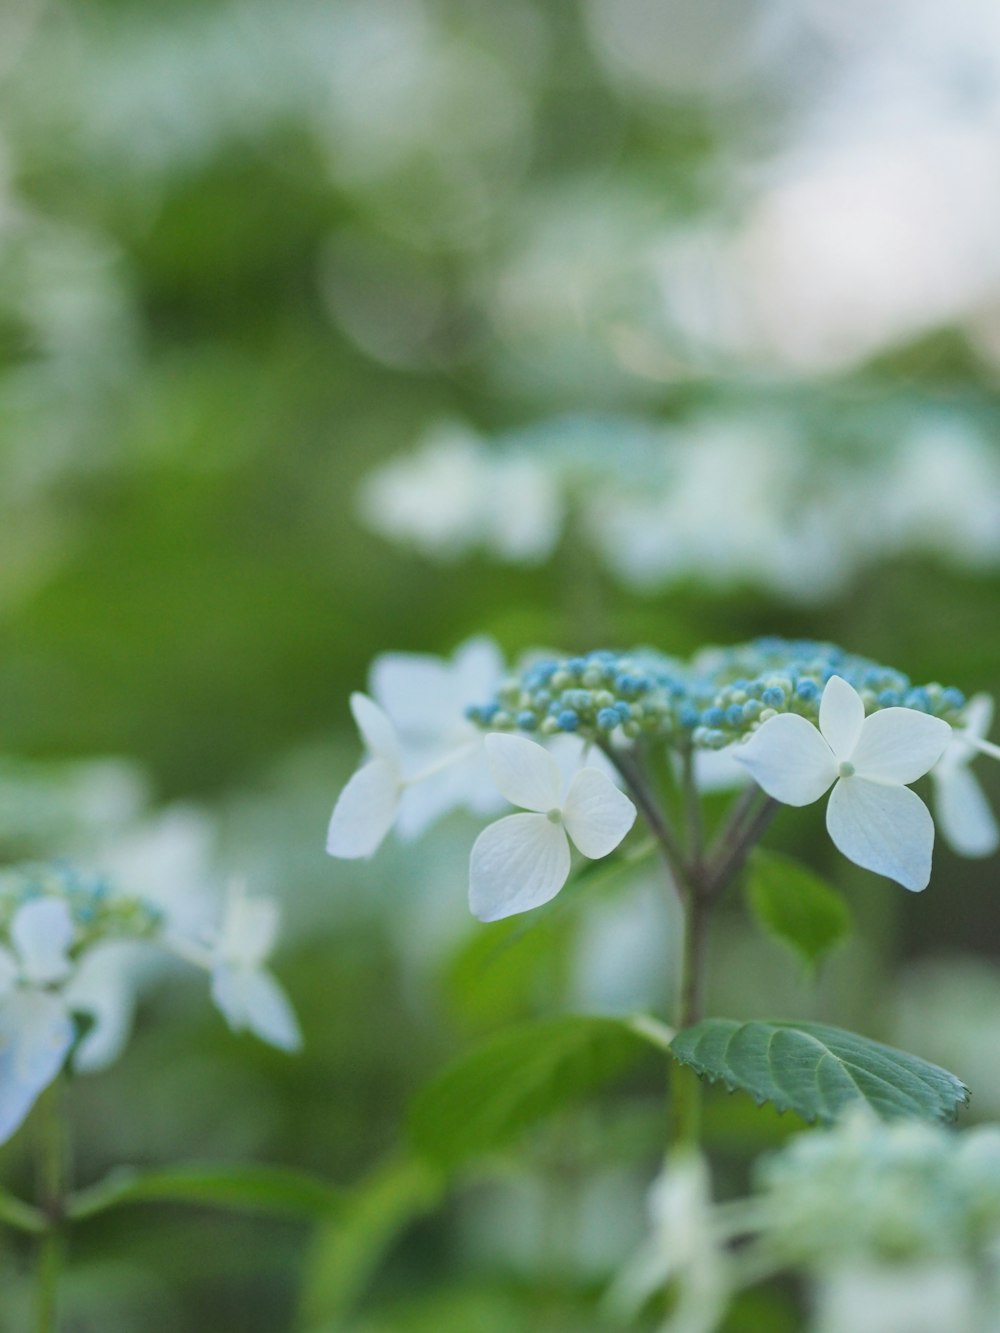 a close up of some white flowers with green leaves